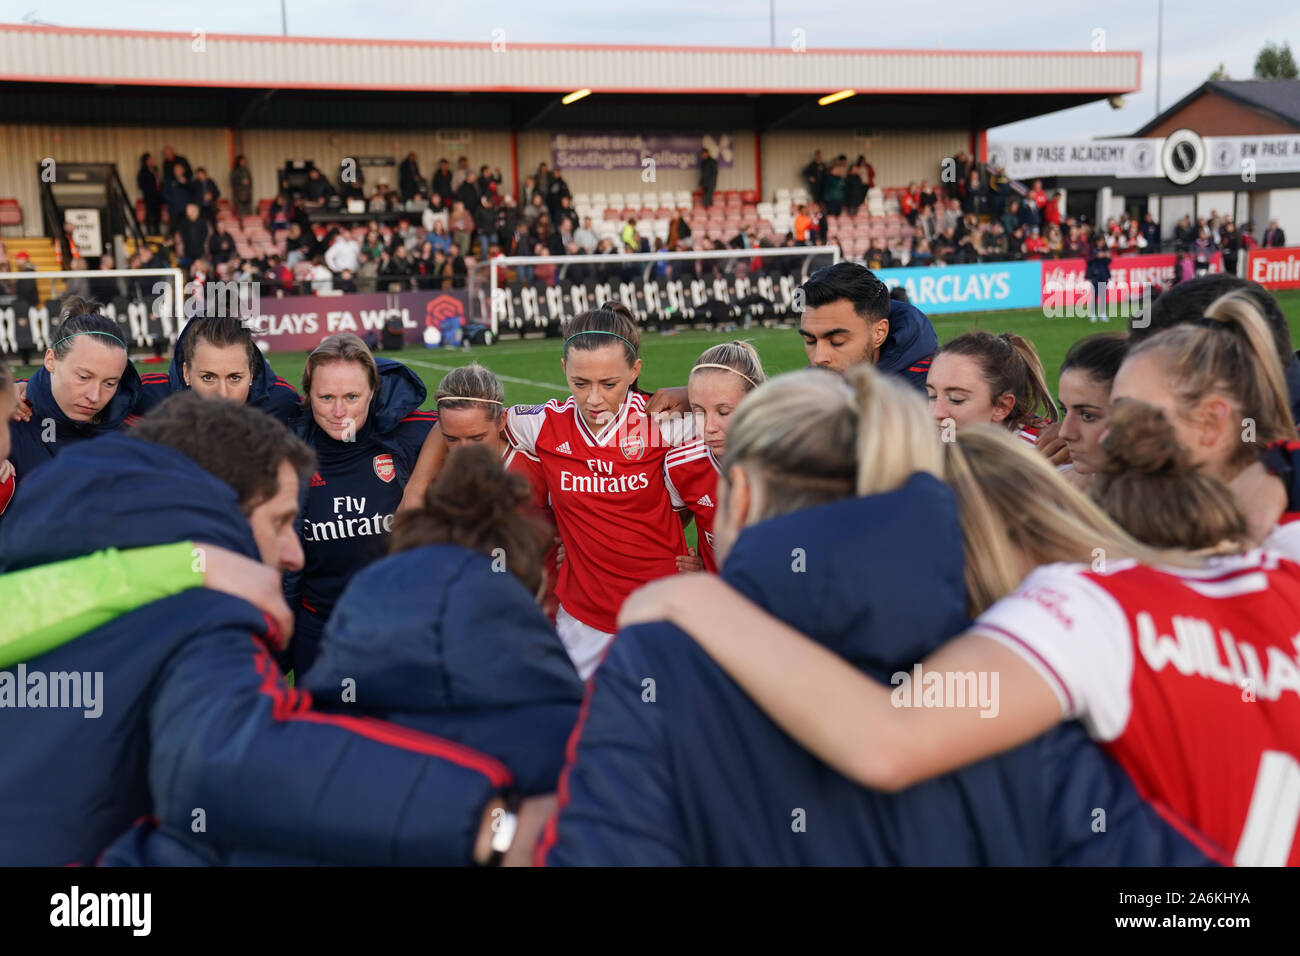 Borehamwood, UK. 27th Oct, 2019. Arsenal players and staff celebrate their victory during the Barclay's FA WSL football match between Arsenal vs Manchester City at Meadow Park on October 27, 2019 in Borehamwood, England (Photo by Daniela Porcelli/SPP) Credit: SPP Sport Press Photo. /Alamy Live News Stock Photo